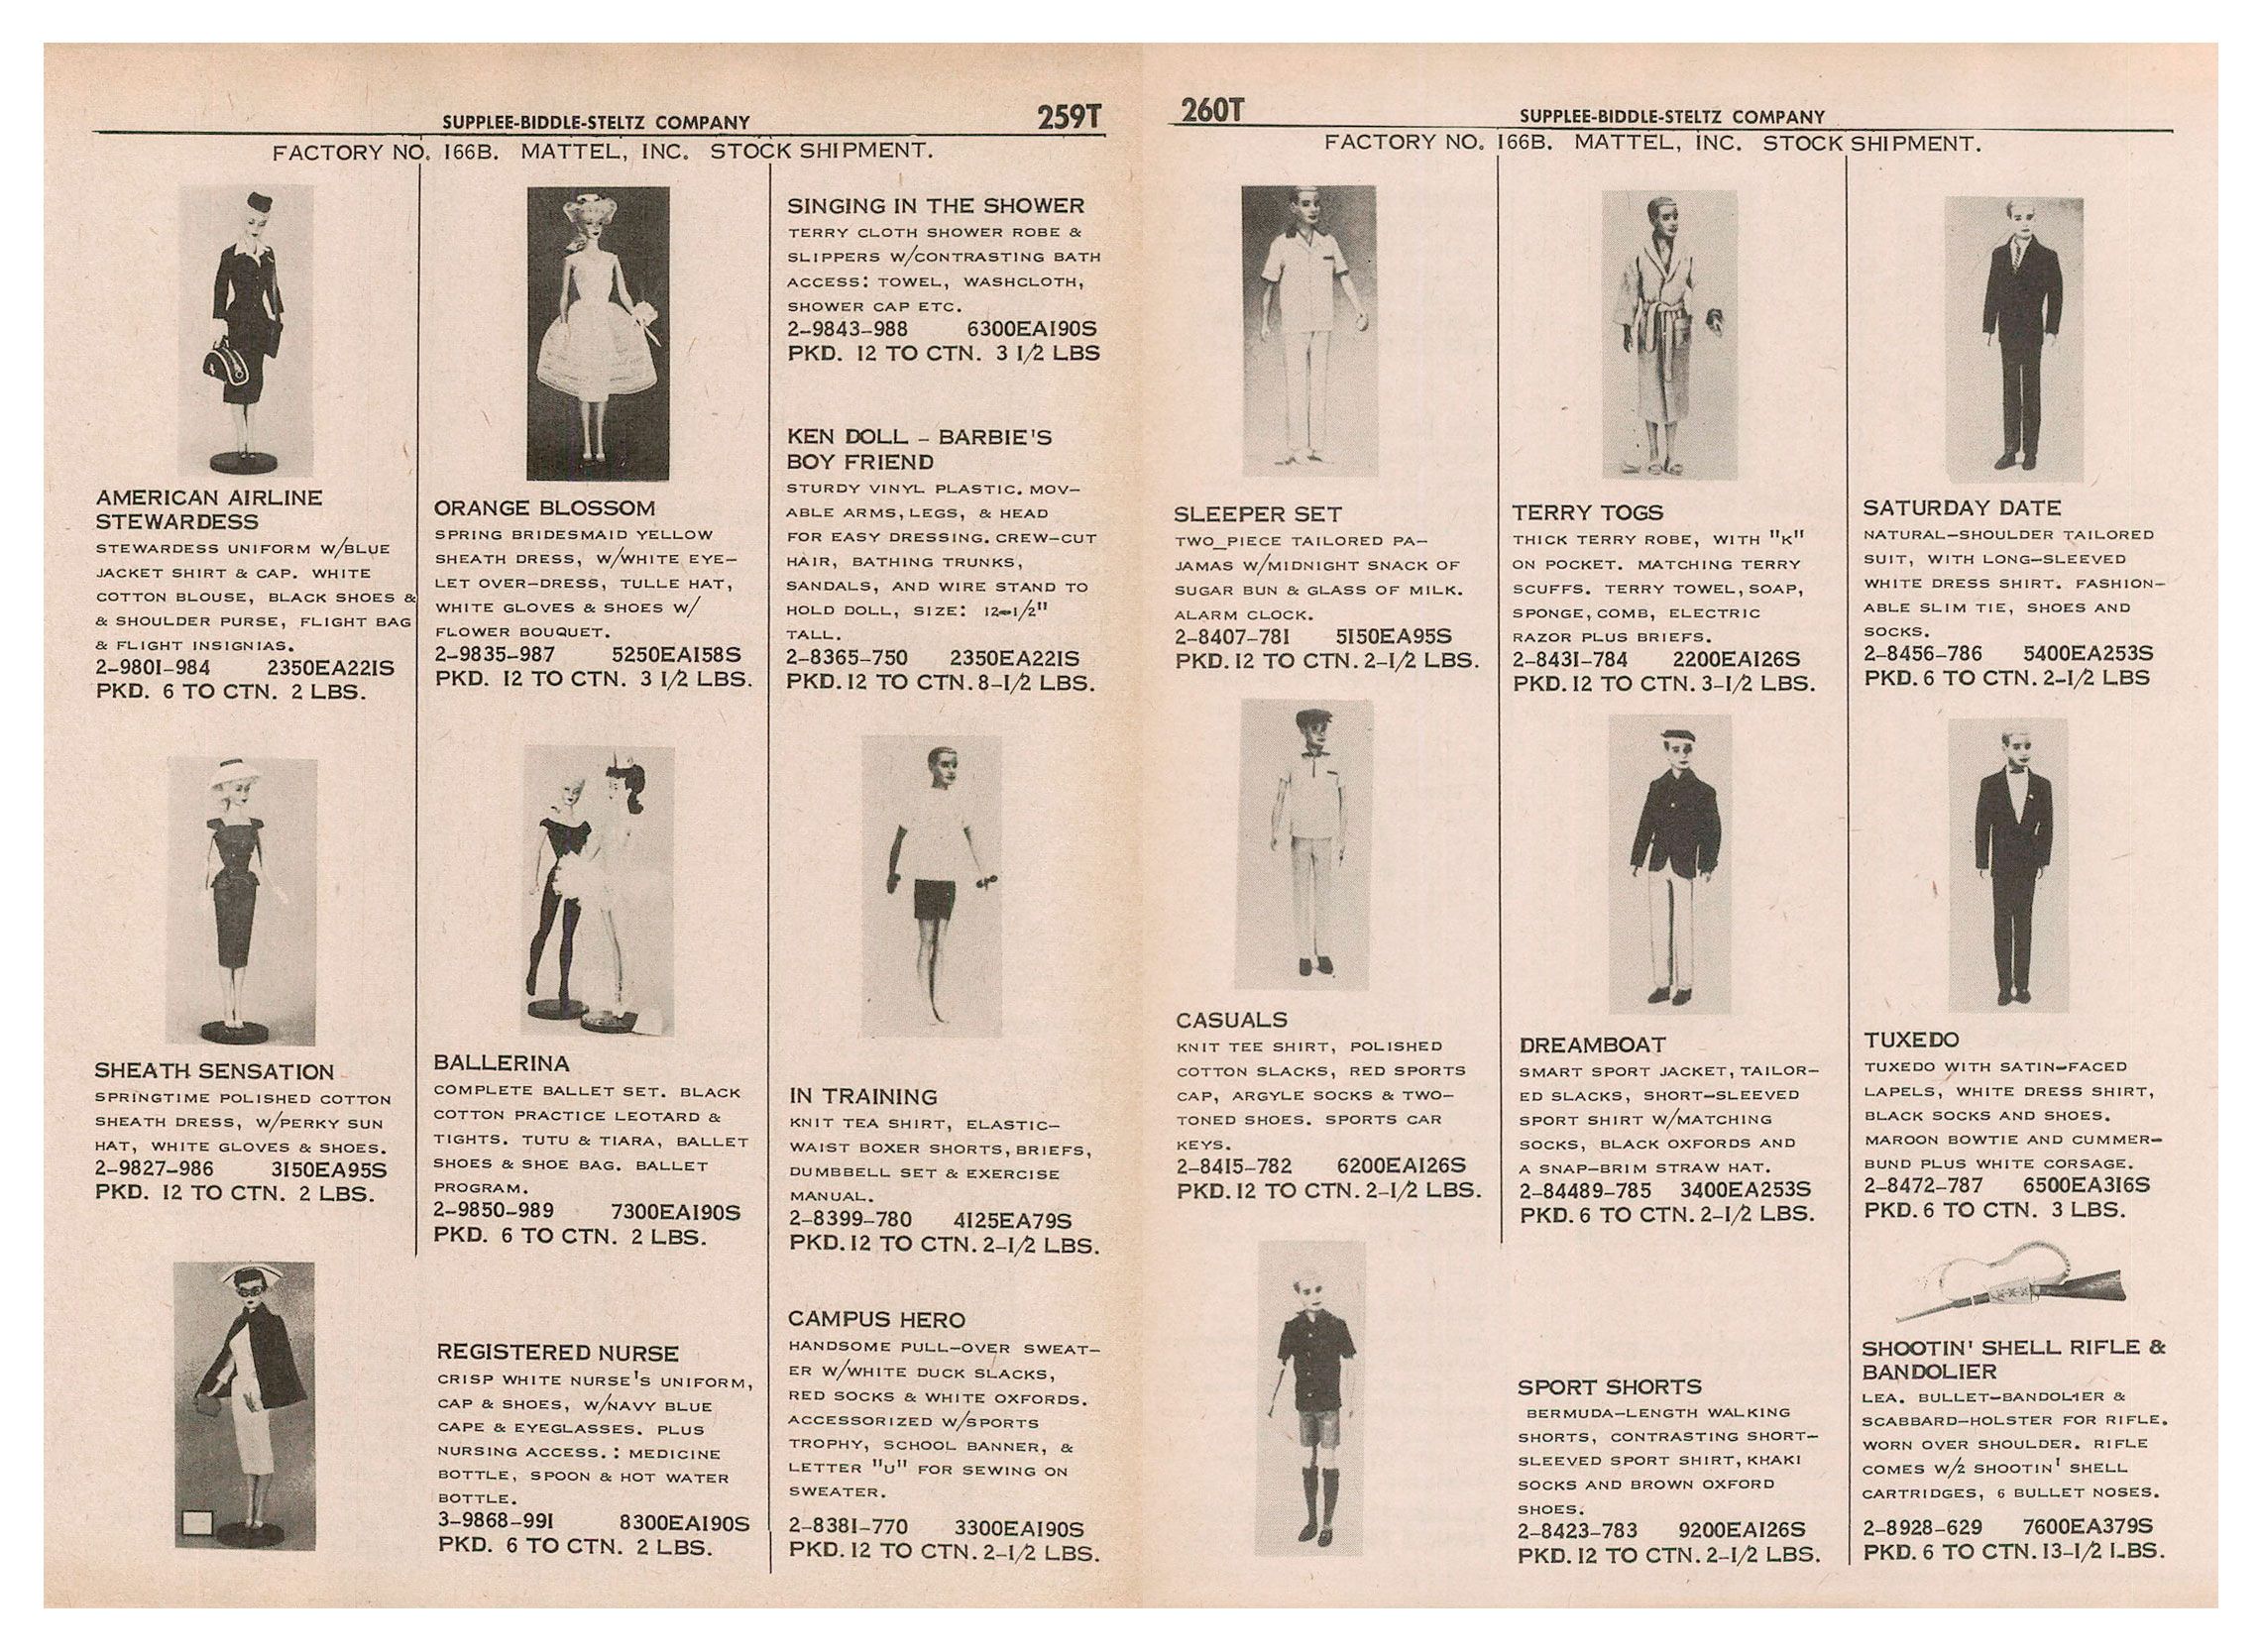 From 1961 Supplee-Biddle-Steltz Company catalogue